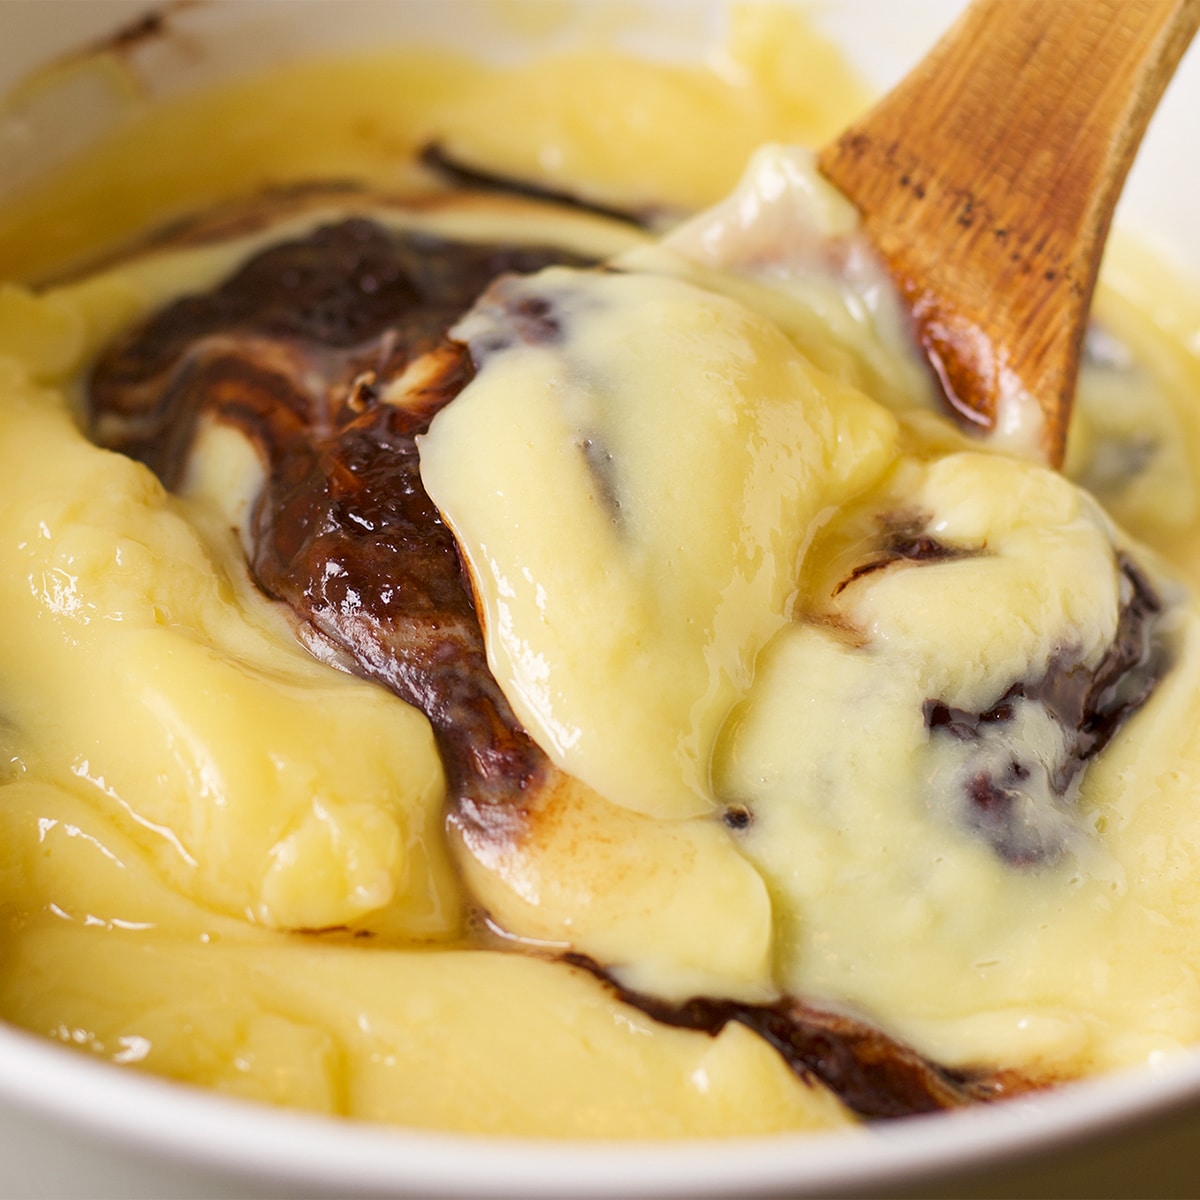 Using a wooden spoon to stir hot pastry cream into melted chocolate.